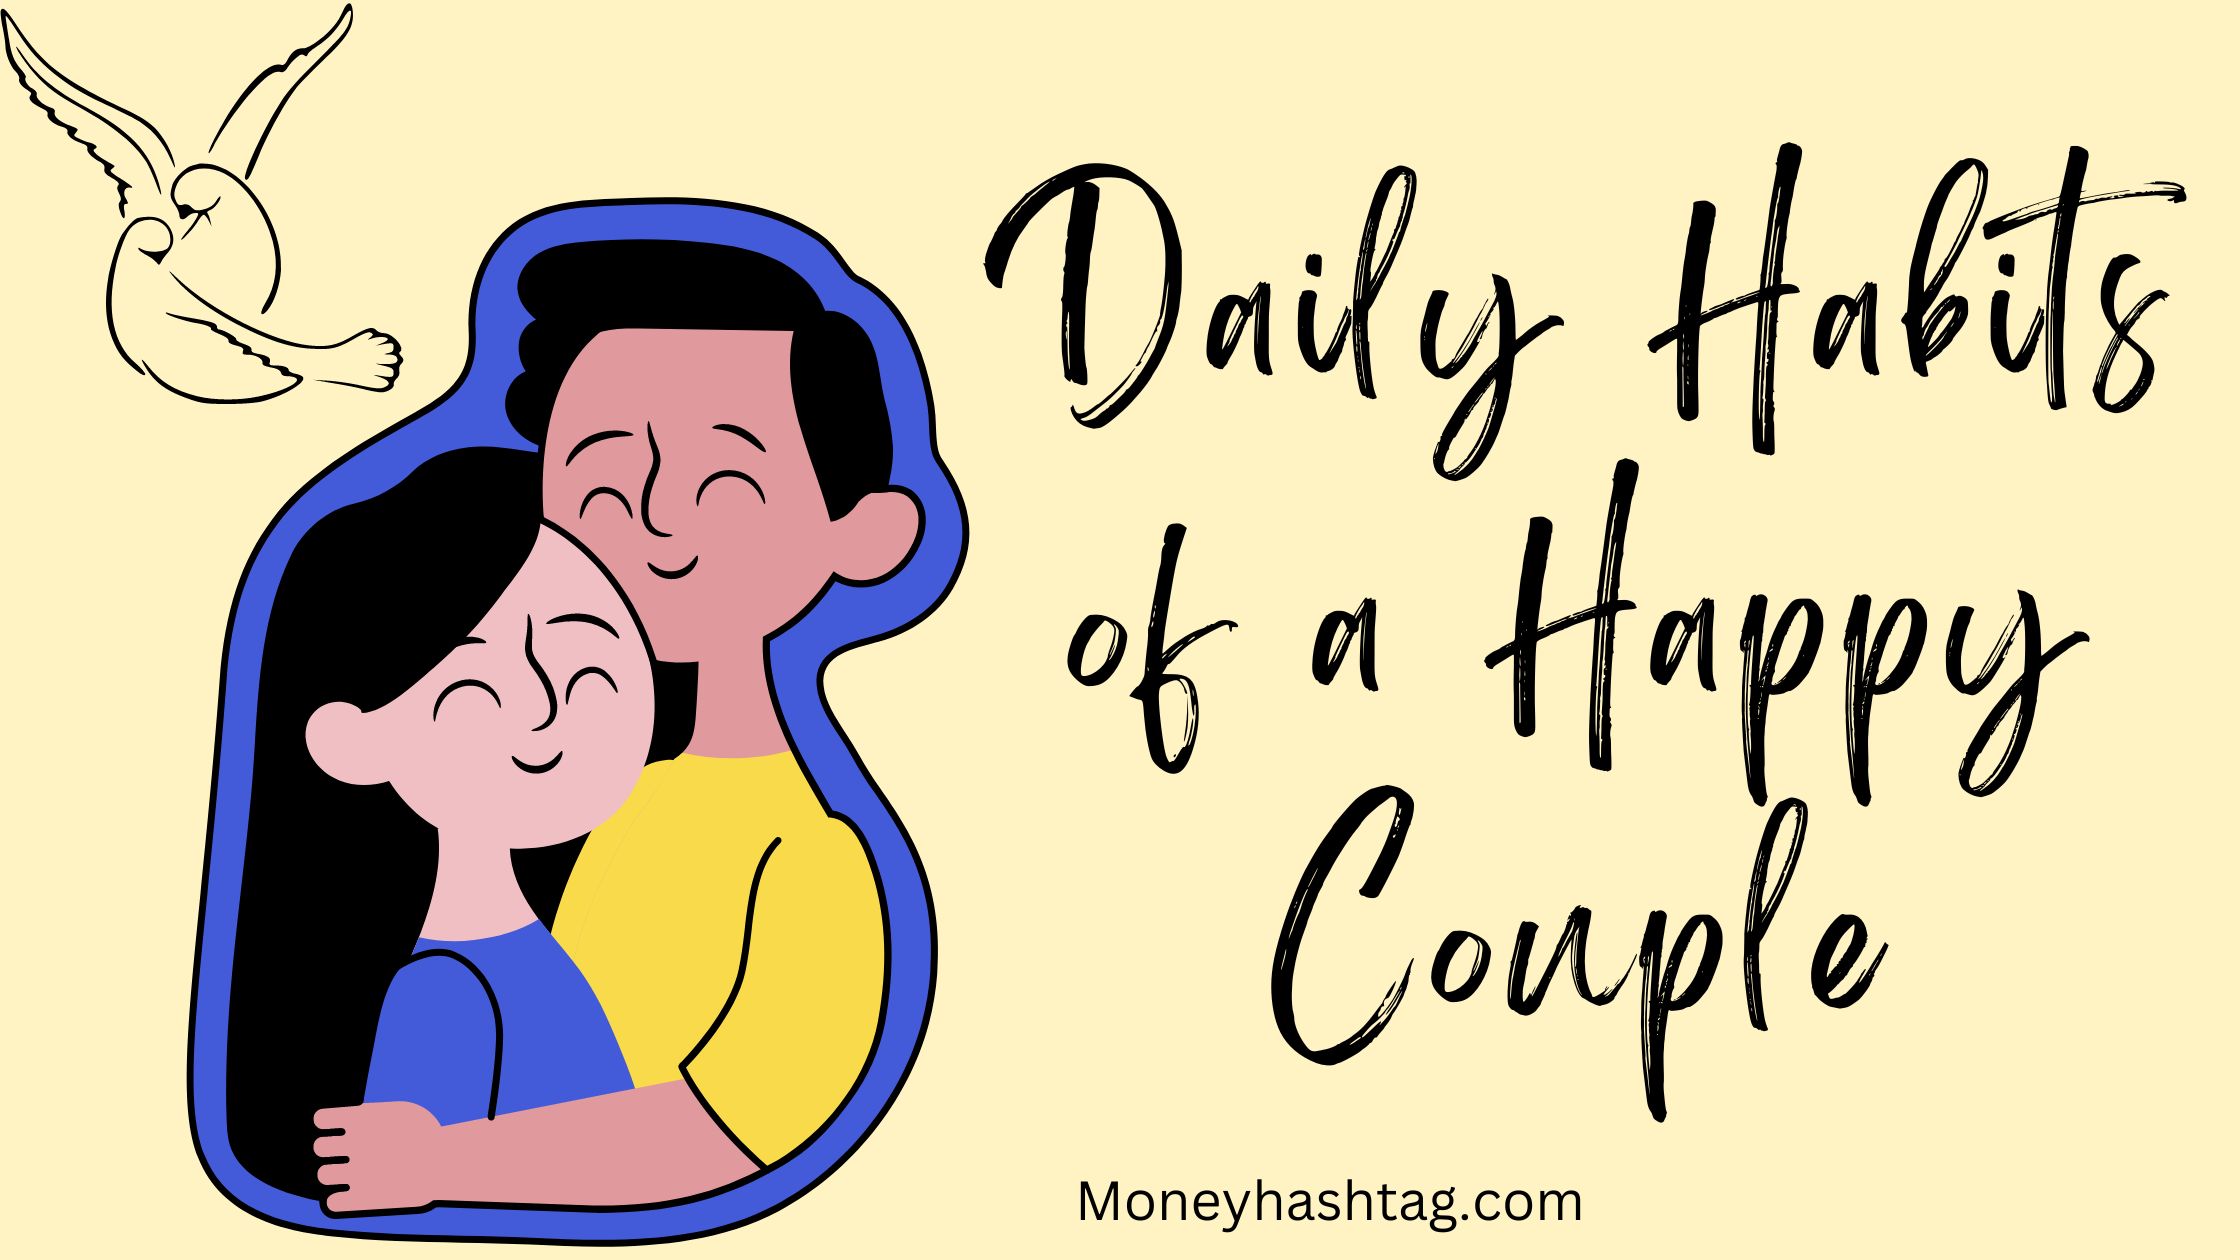 21 Daily Habits of a Happy Couple: How to be happier every day 15